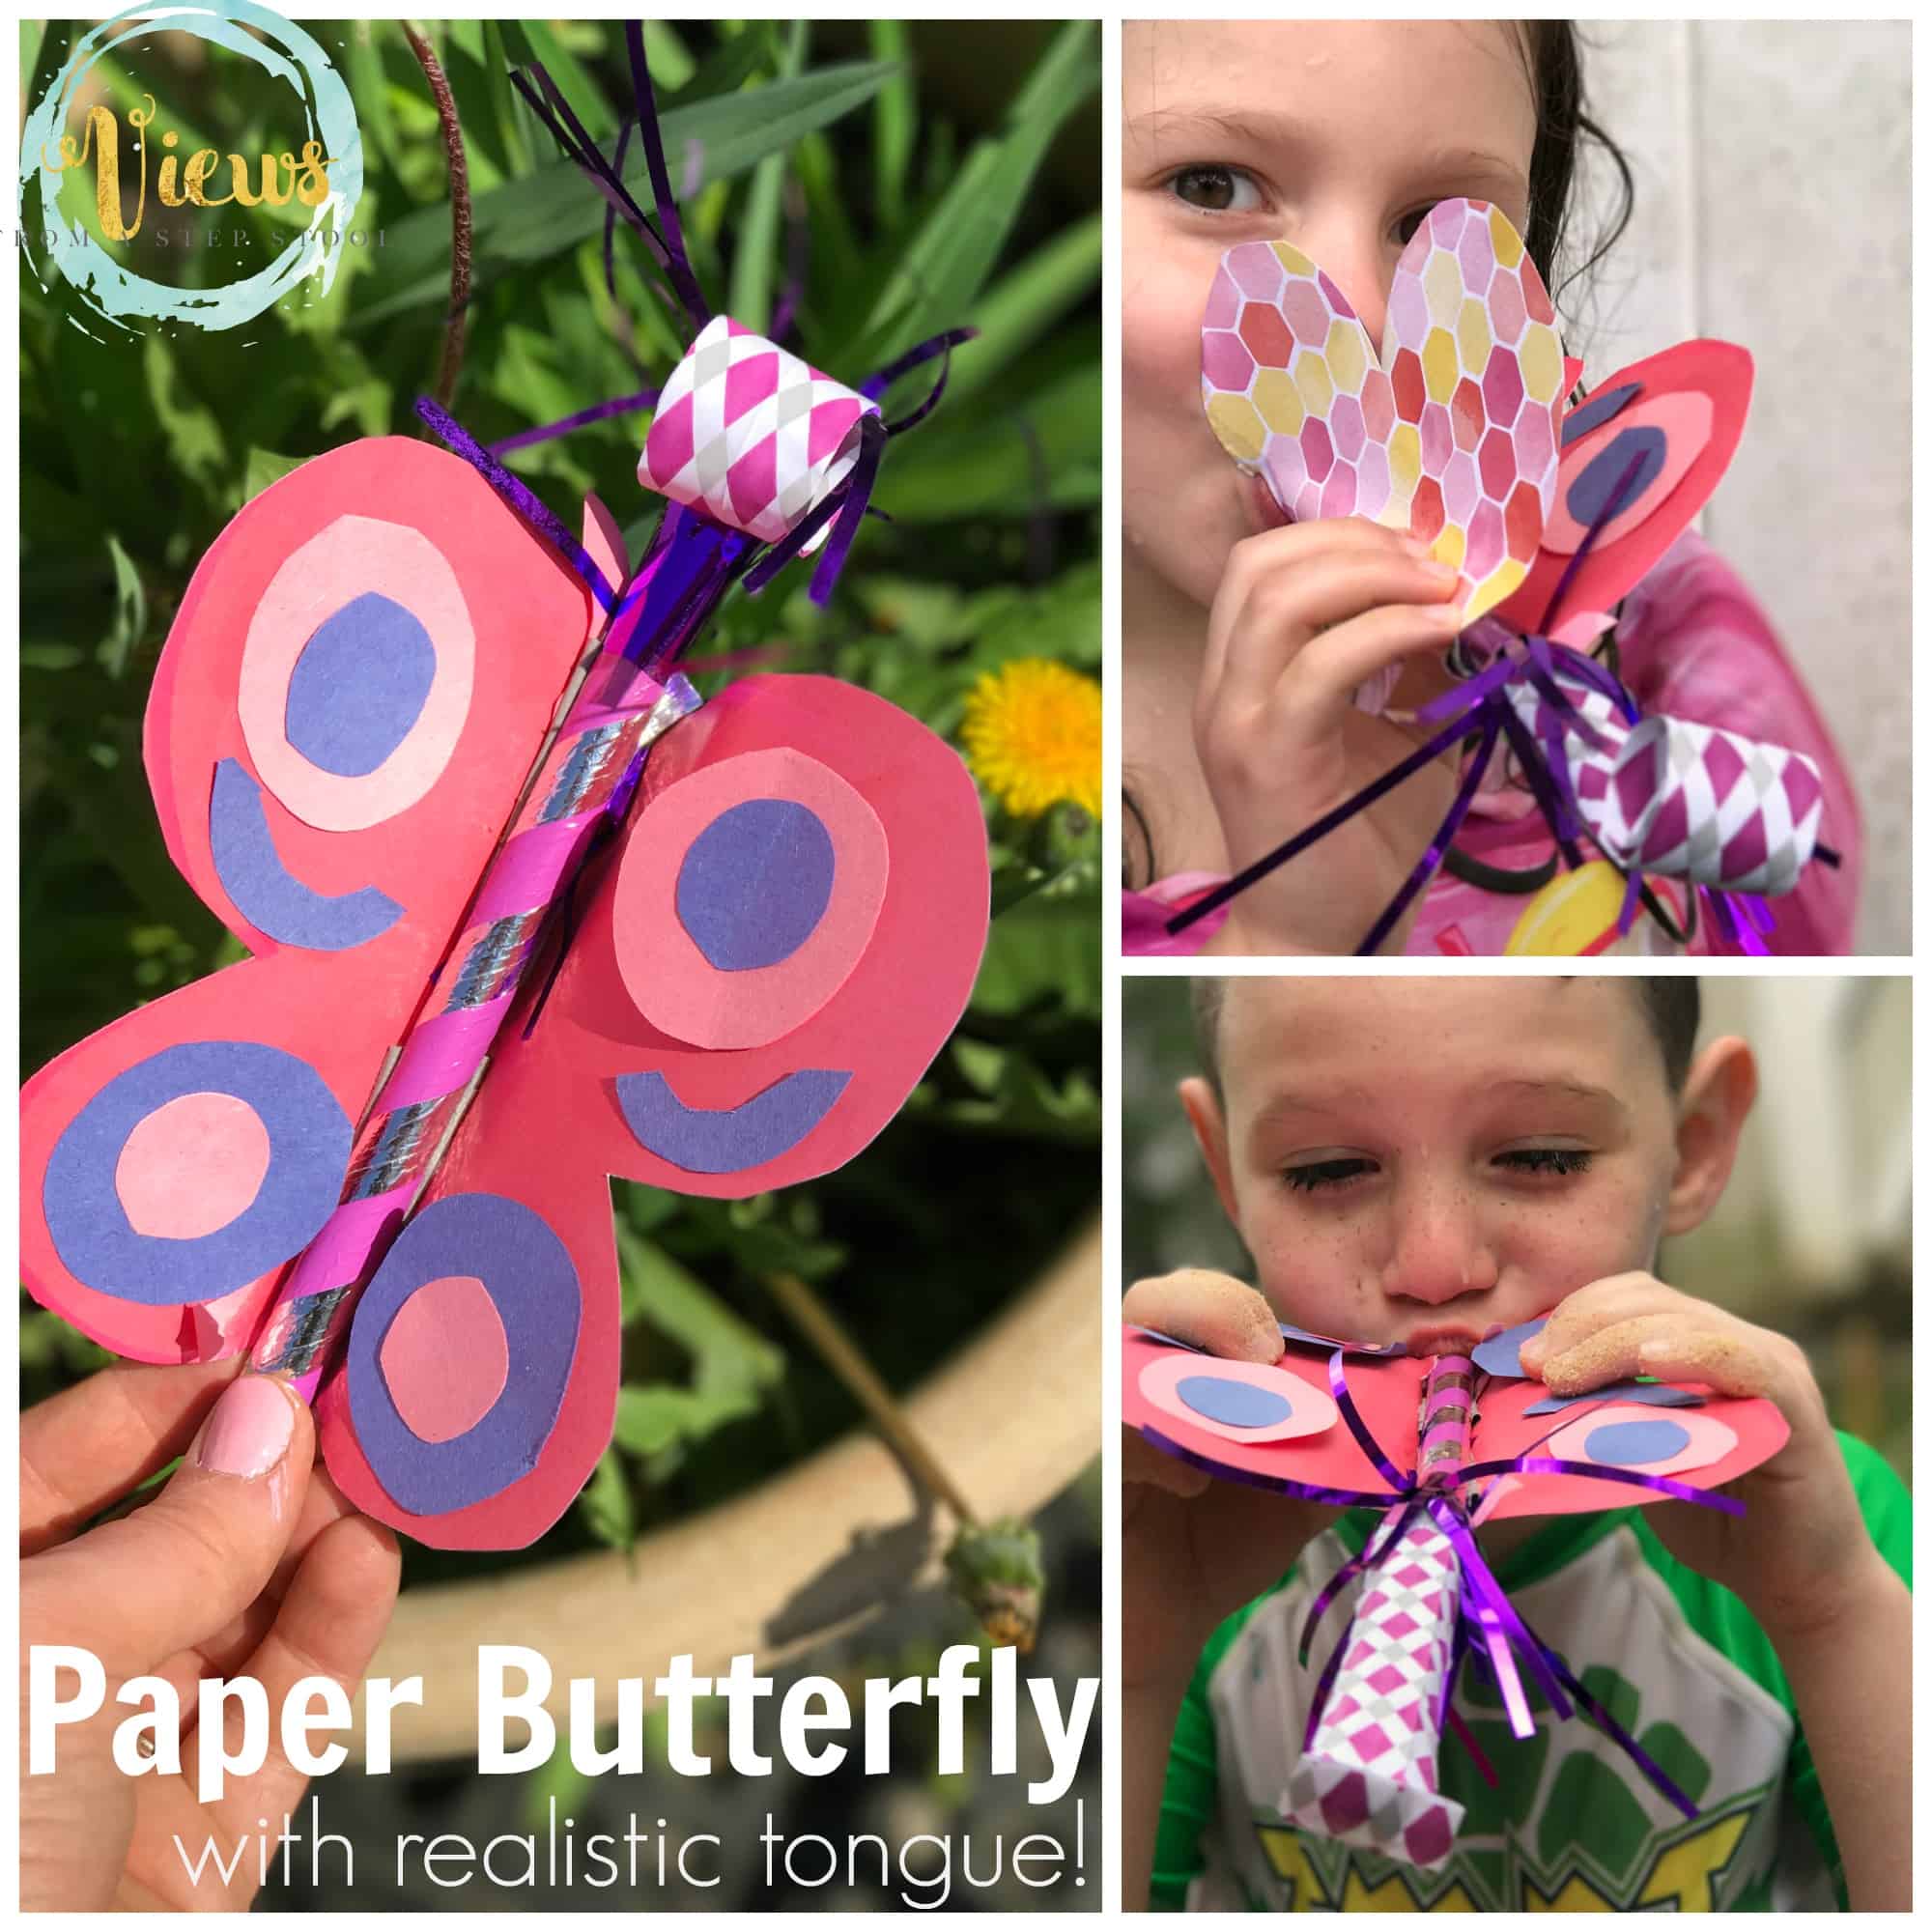 This paper butterfly craft for kids has a party horn as a realistic tongue for pretend play! 